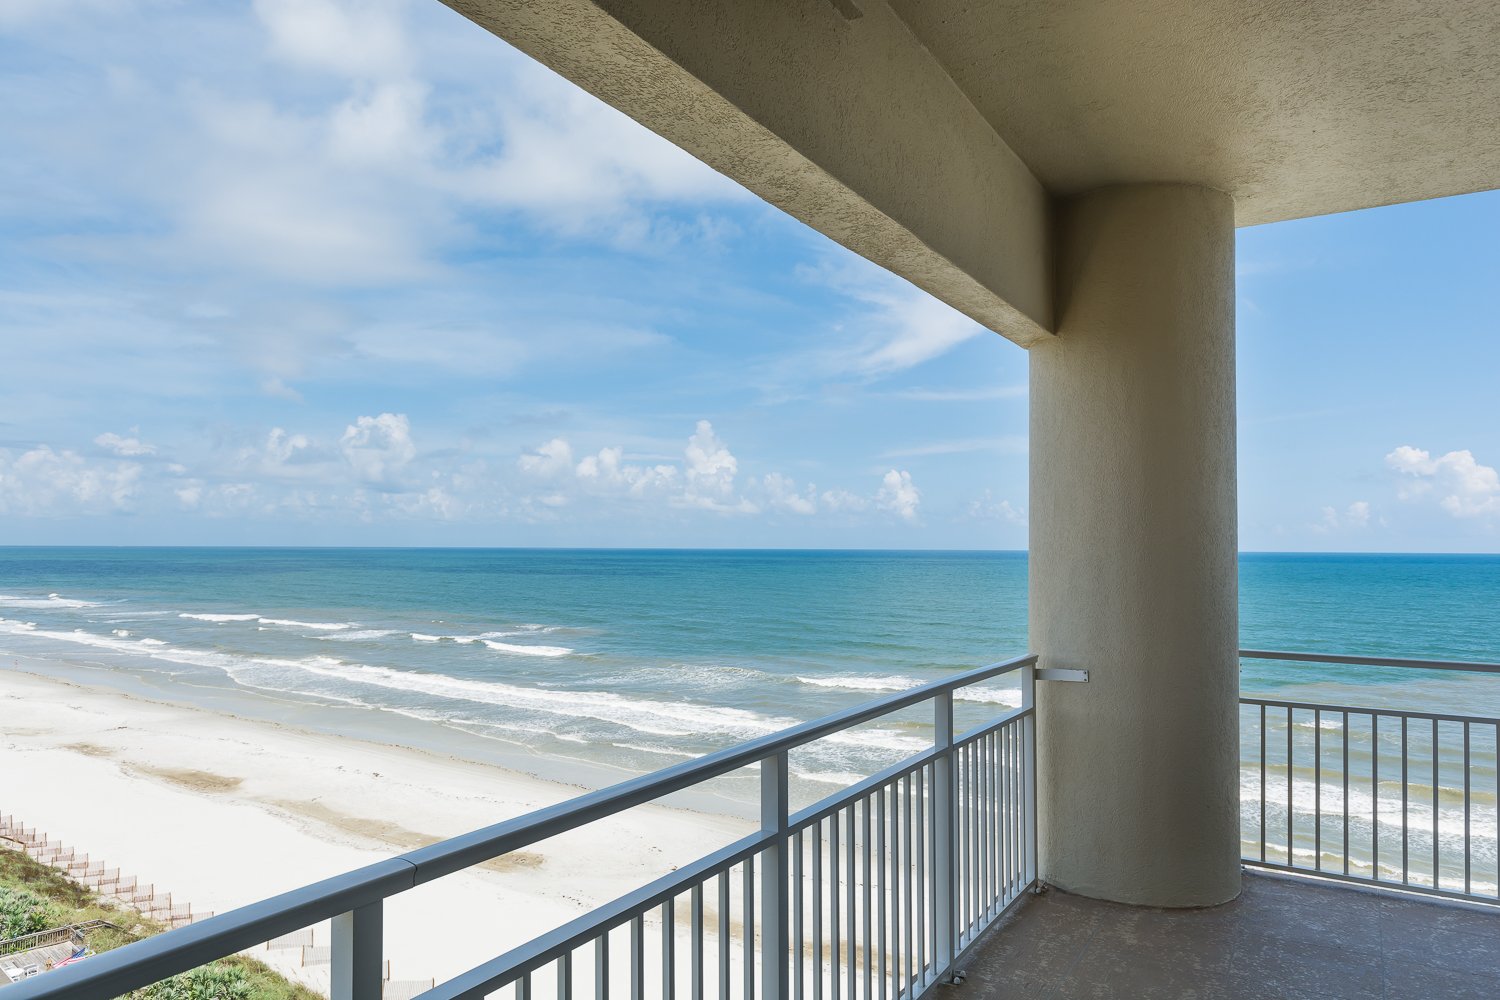 This is a New Smyrna Beach condo rental oceanfront condo with northern exposure.